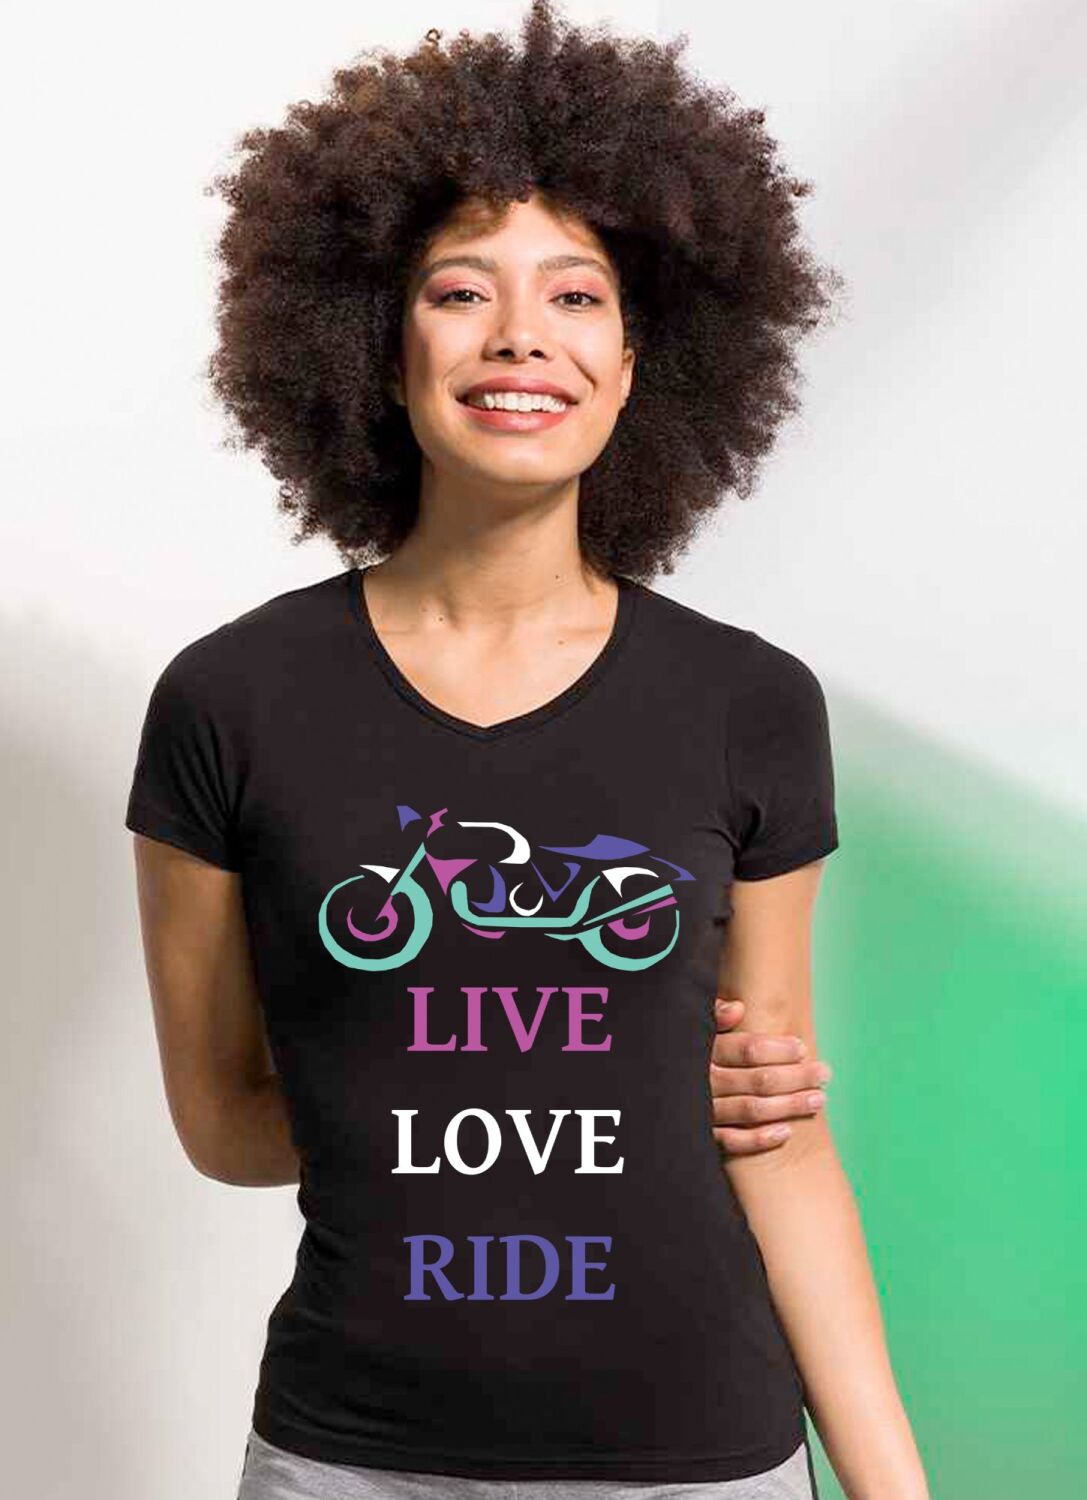 A. Lady women girl biker motorcycle Live Love Ride ladies fit v neck tee t-